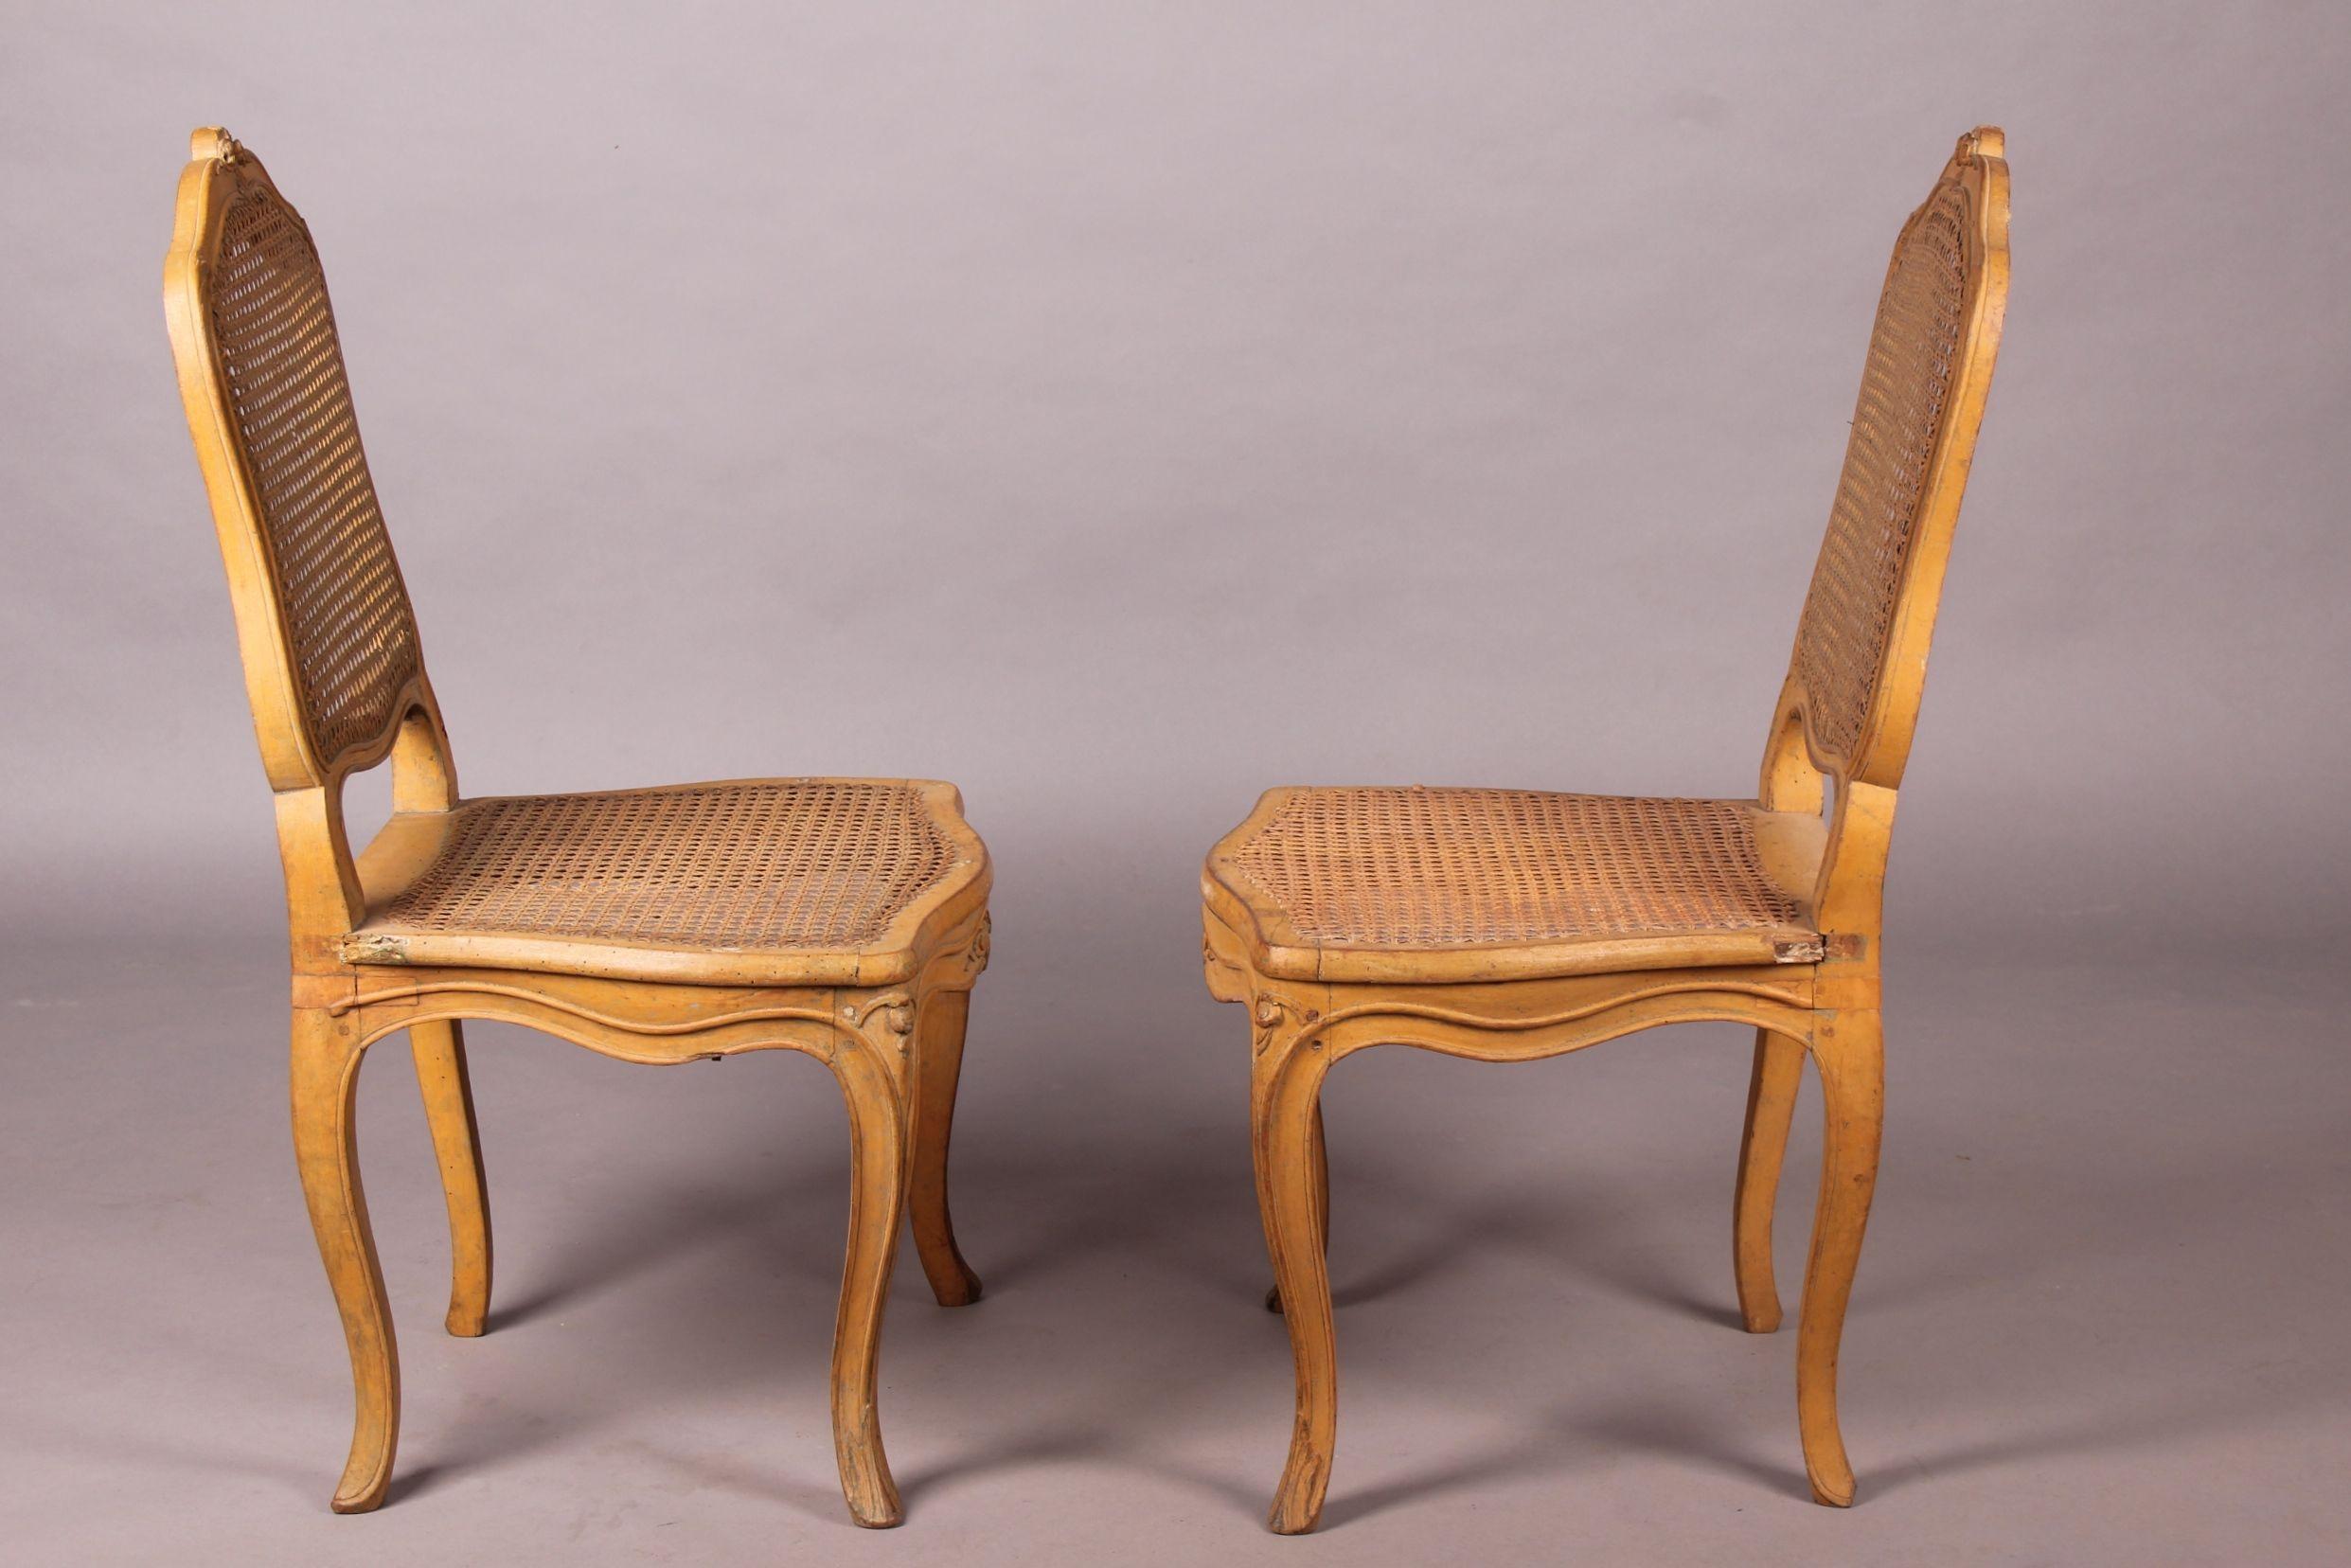 Four French painted Louis XV caned Provincial chairs, the canage is torn in three places.